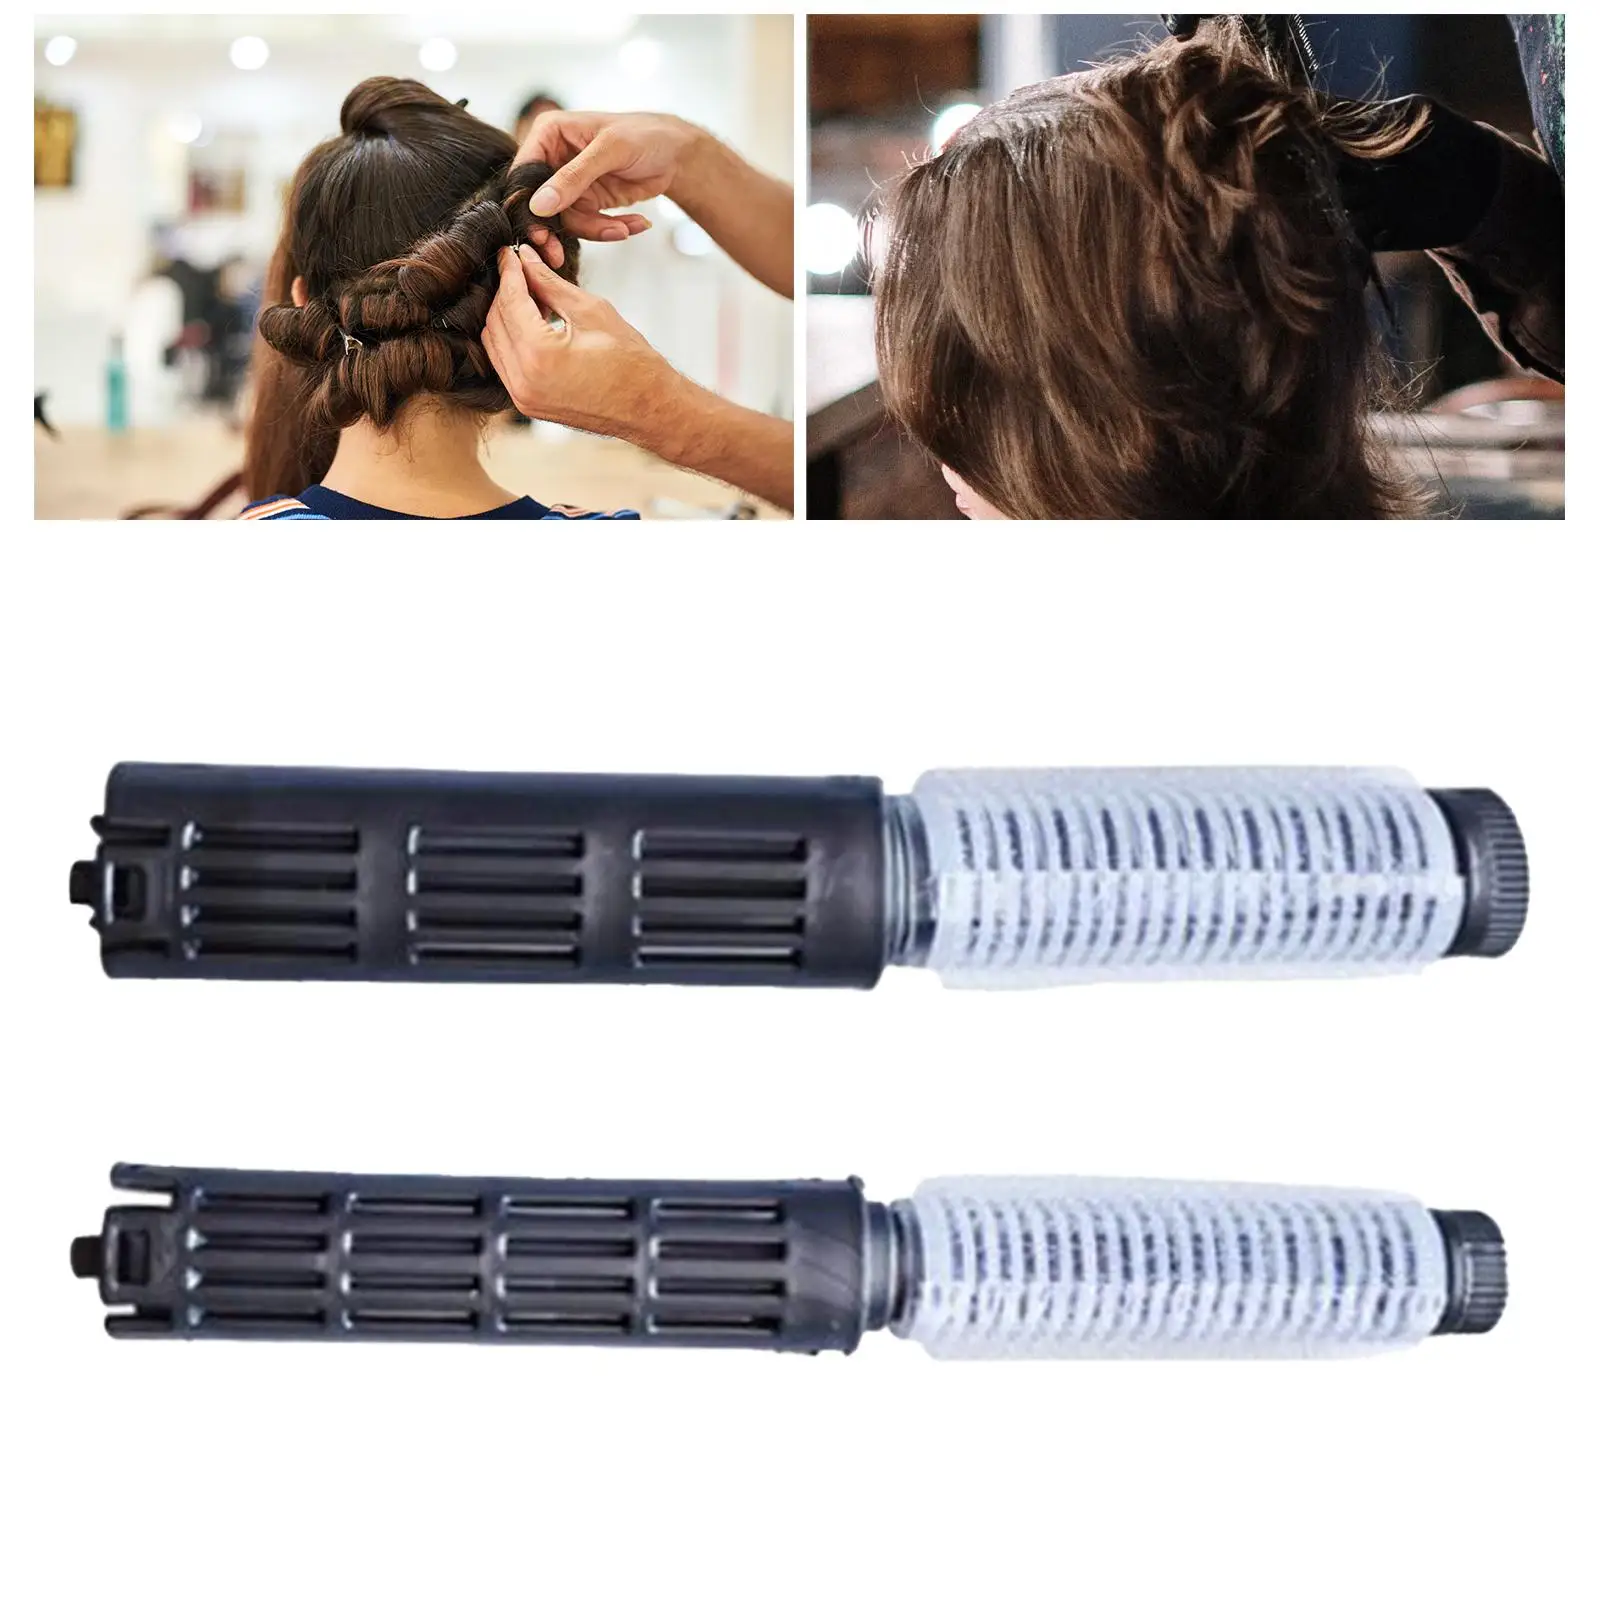 Hair Cold Wave Rods DIY Accessories Durable No Heat Morgan Perm Curler Clips for Salon Barber Home Long Short Hair Women Girls